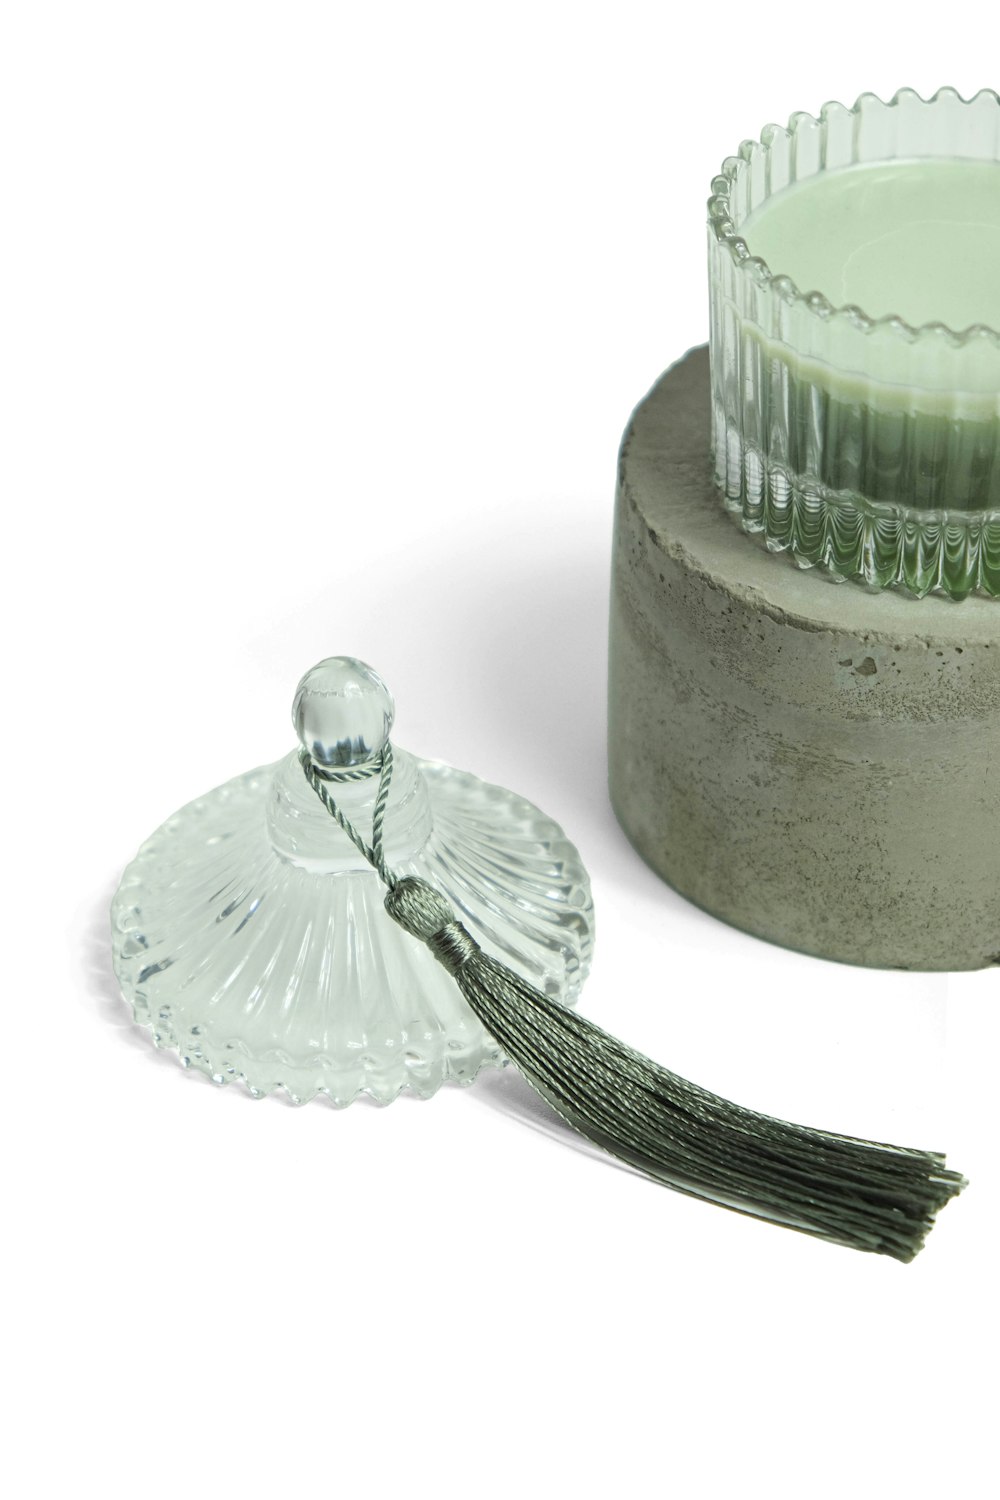 a candle holder with a glass candle on top of it